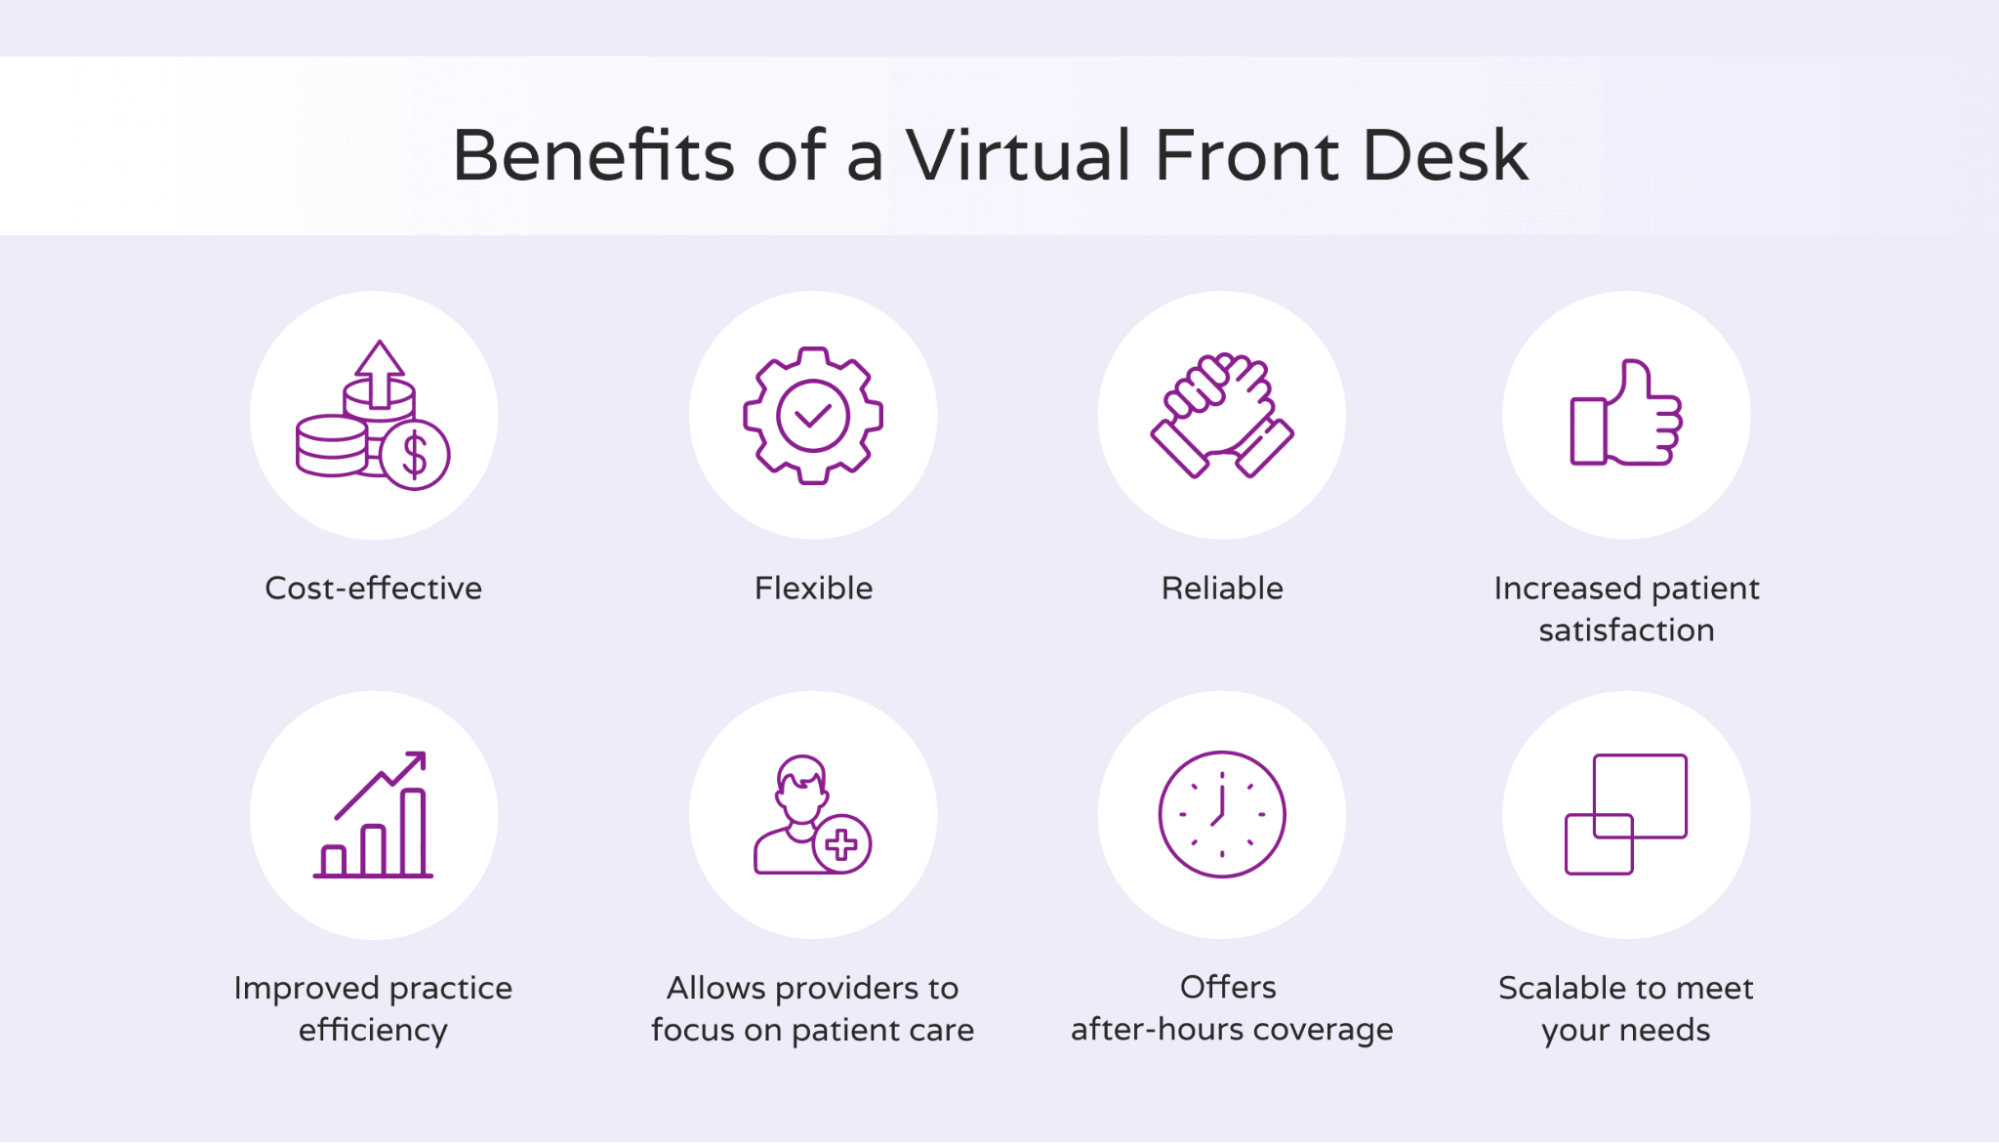 Top benefits of a virtual front desk